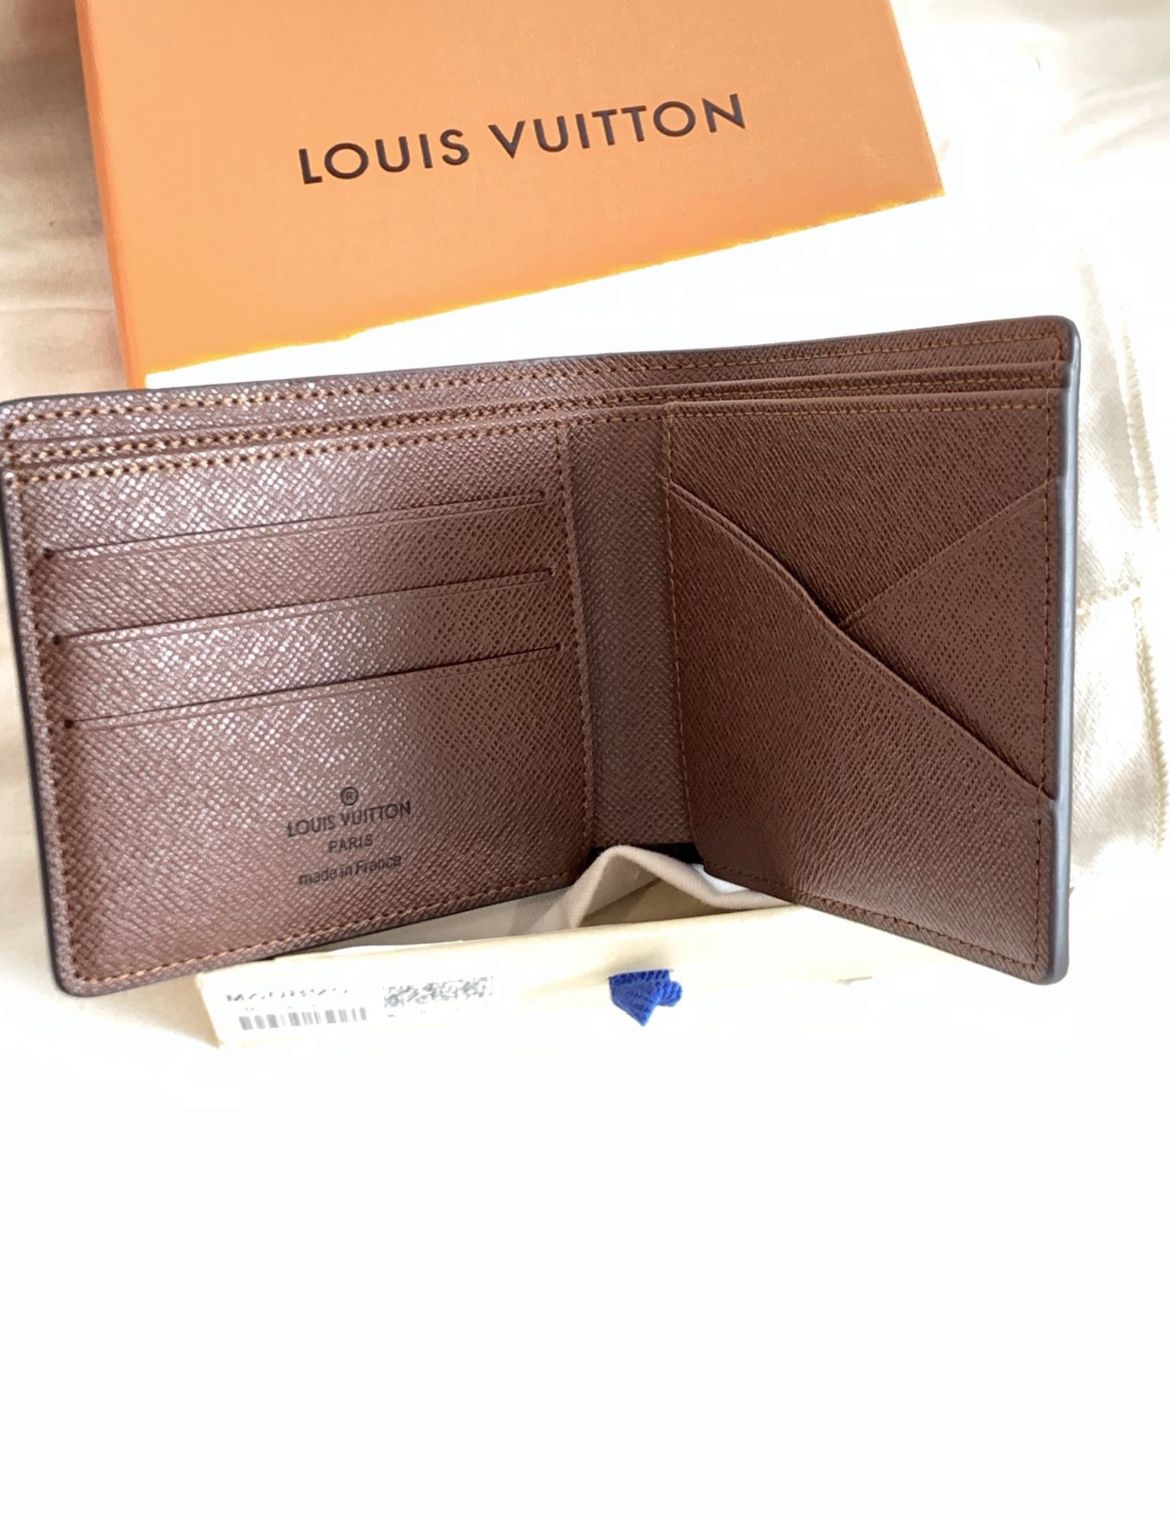 Louis Vuitton Mens Wallet for Sale in Lake Grove, NY - OfferUp